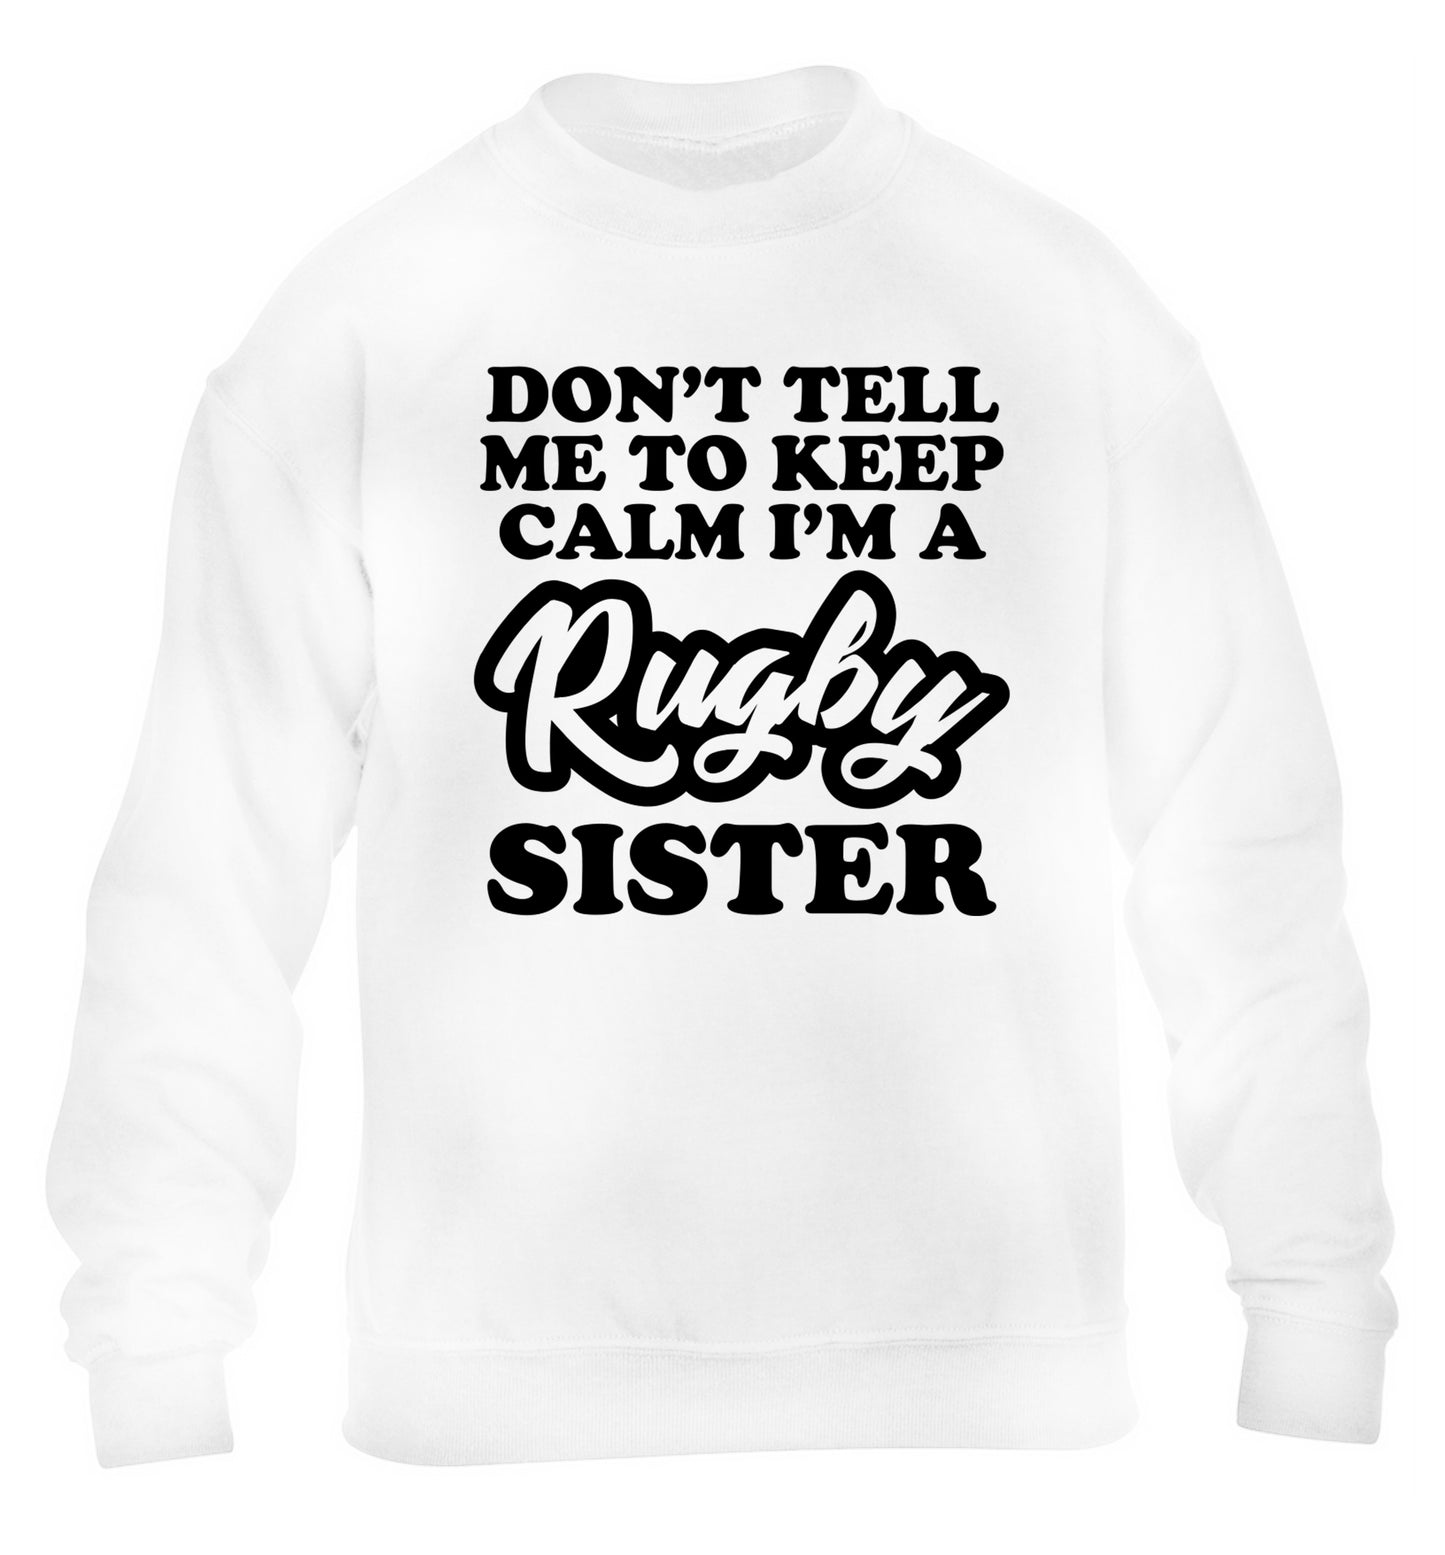 Don't tell me keep calm I'm a rugby sister children's white sweater 12-13 Years